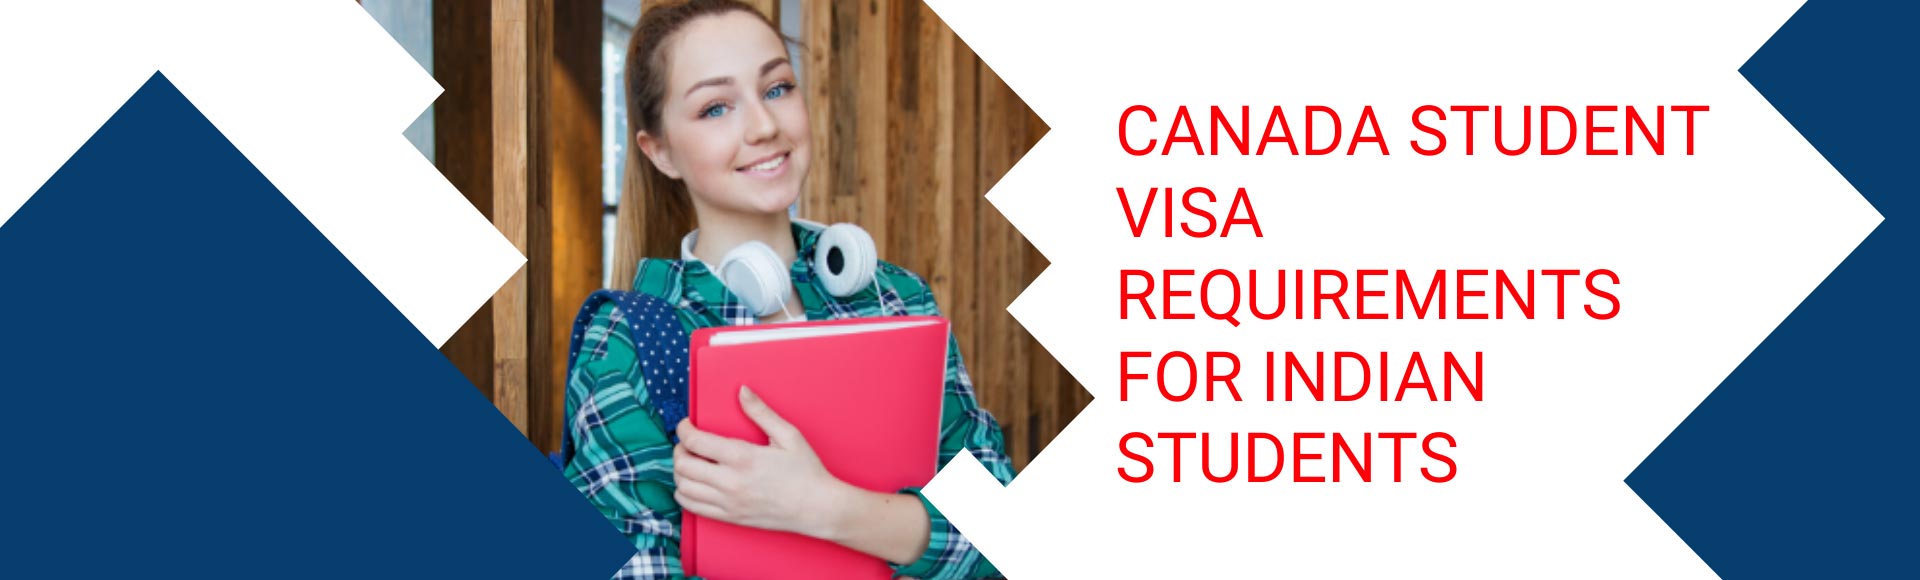 Canada Student Visa Requirements for Indian students